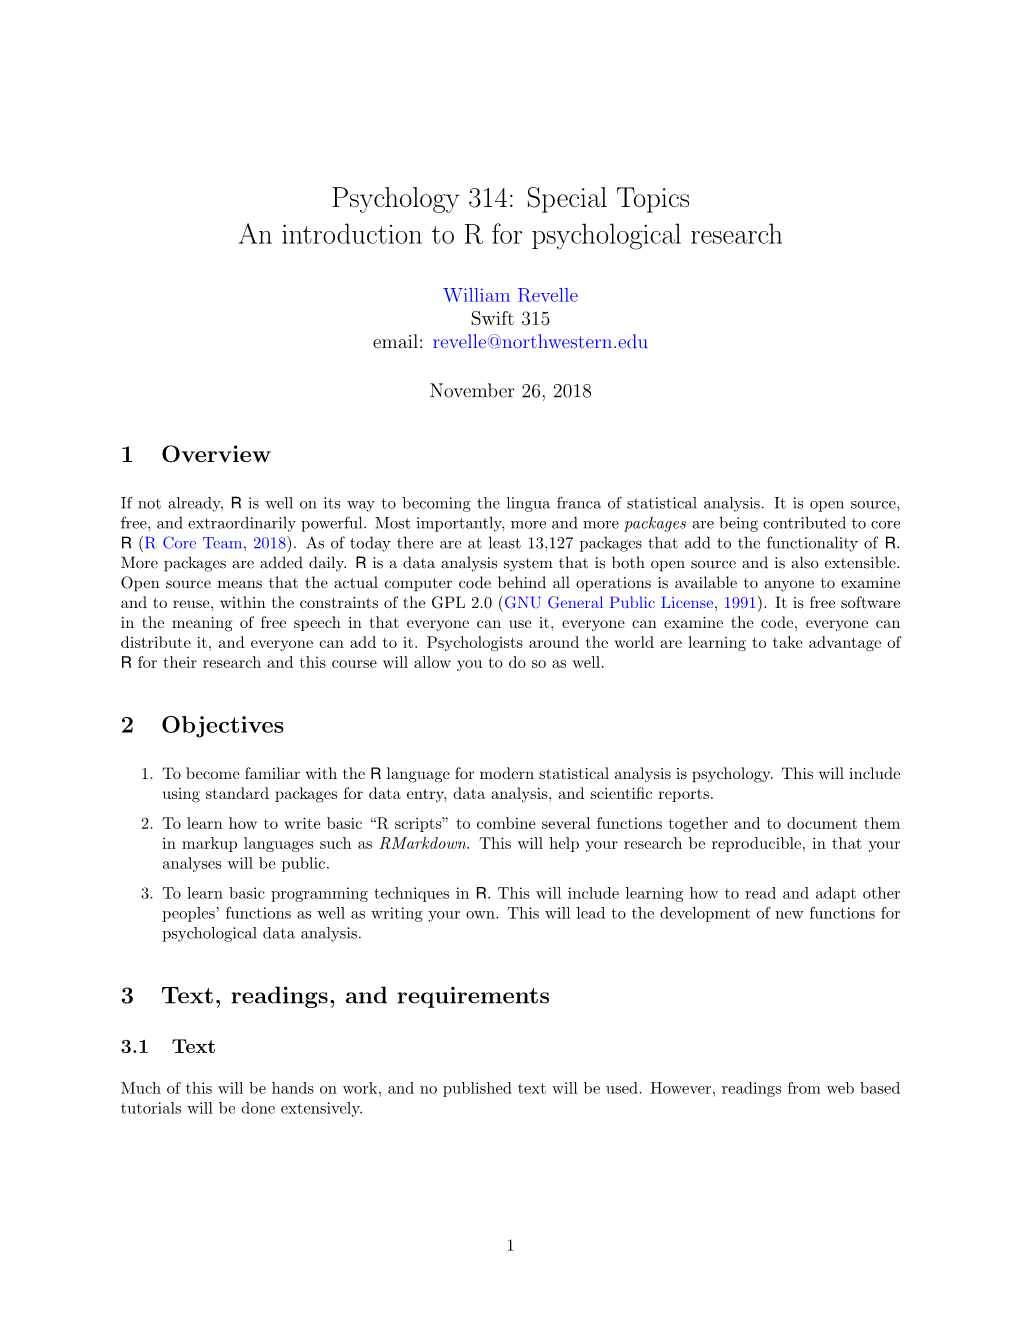 Psychology 314: Special Topics an Introduction to R for Psychological Research